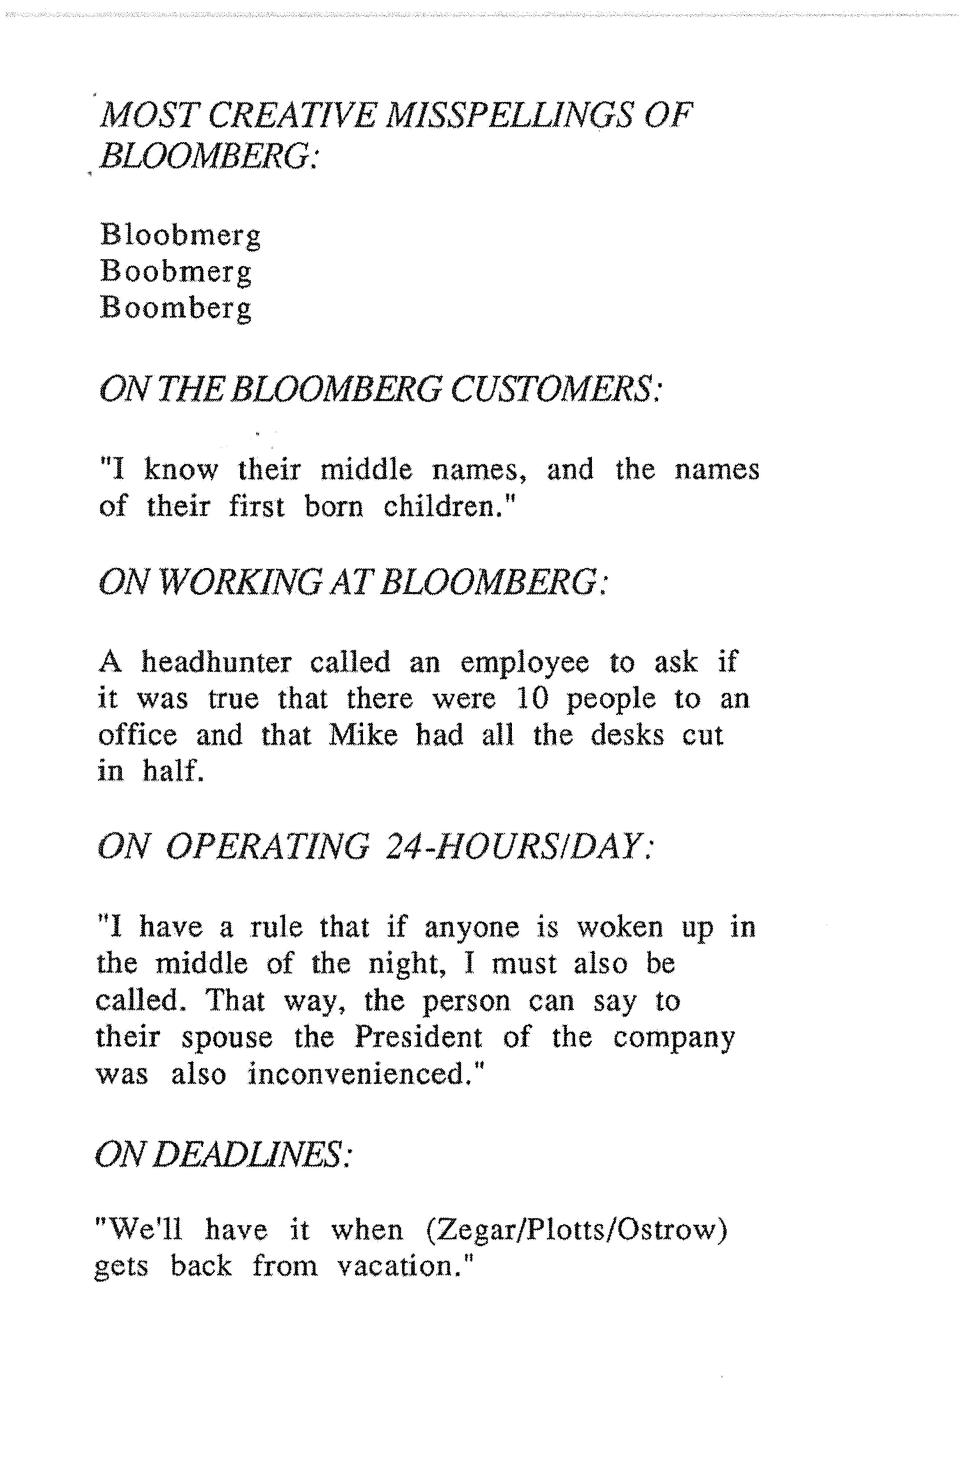 Page 20, The Portable Bloomberg